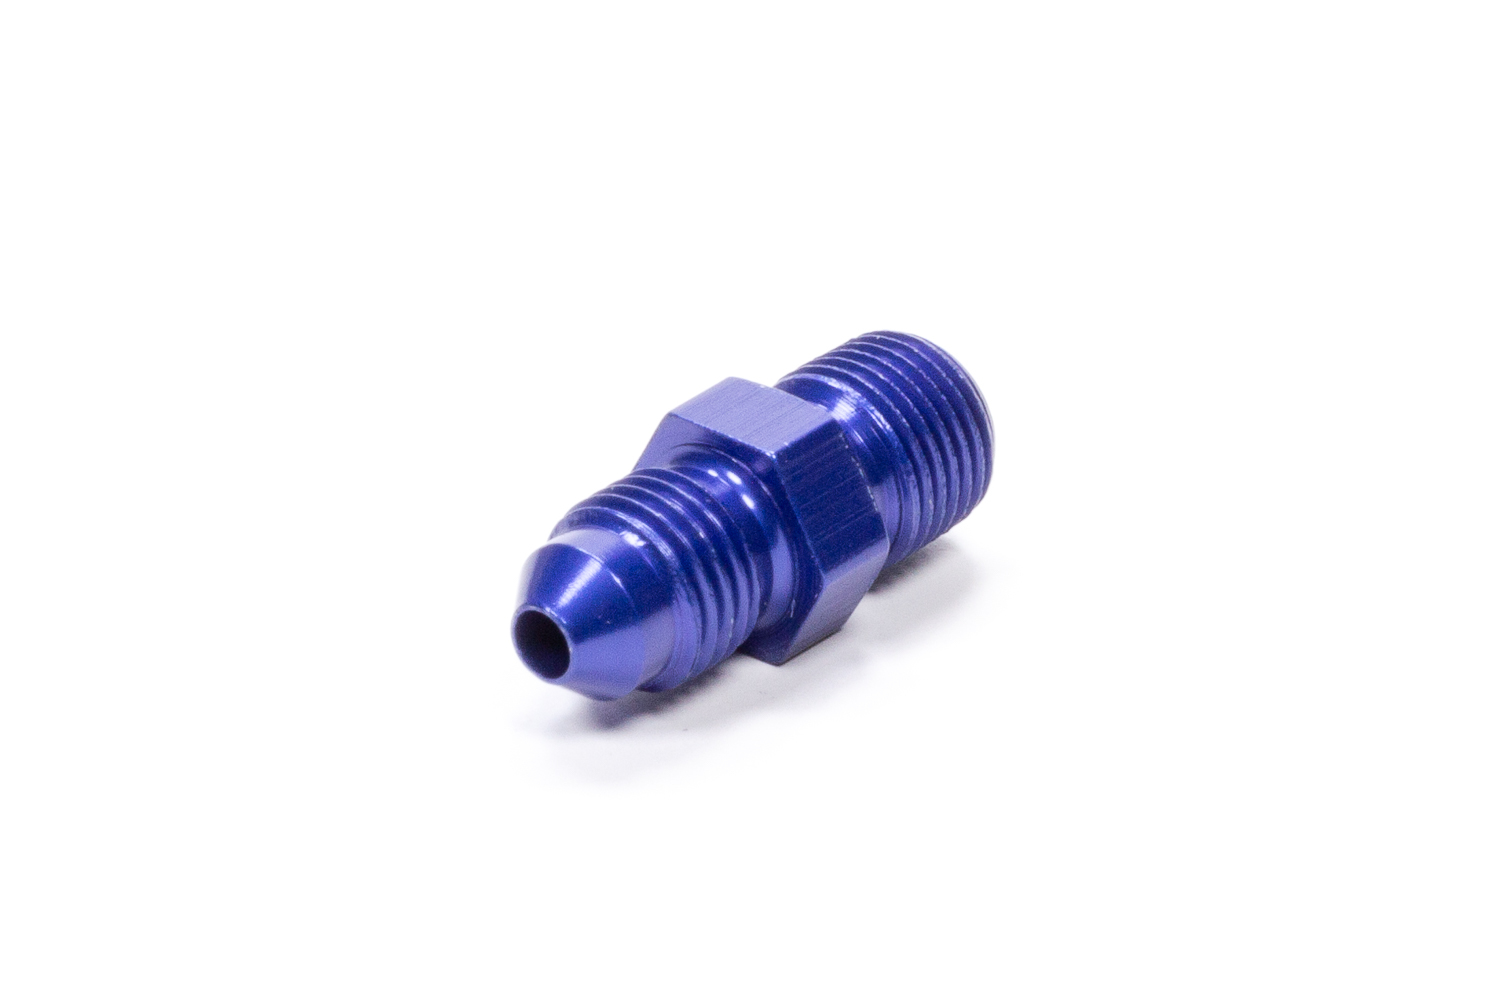 Fragola 481604 Fitting, Adapter, Straight, 4 AN Male to 1/8 in NPT Male, Aluminum, Blue Anodized, Each